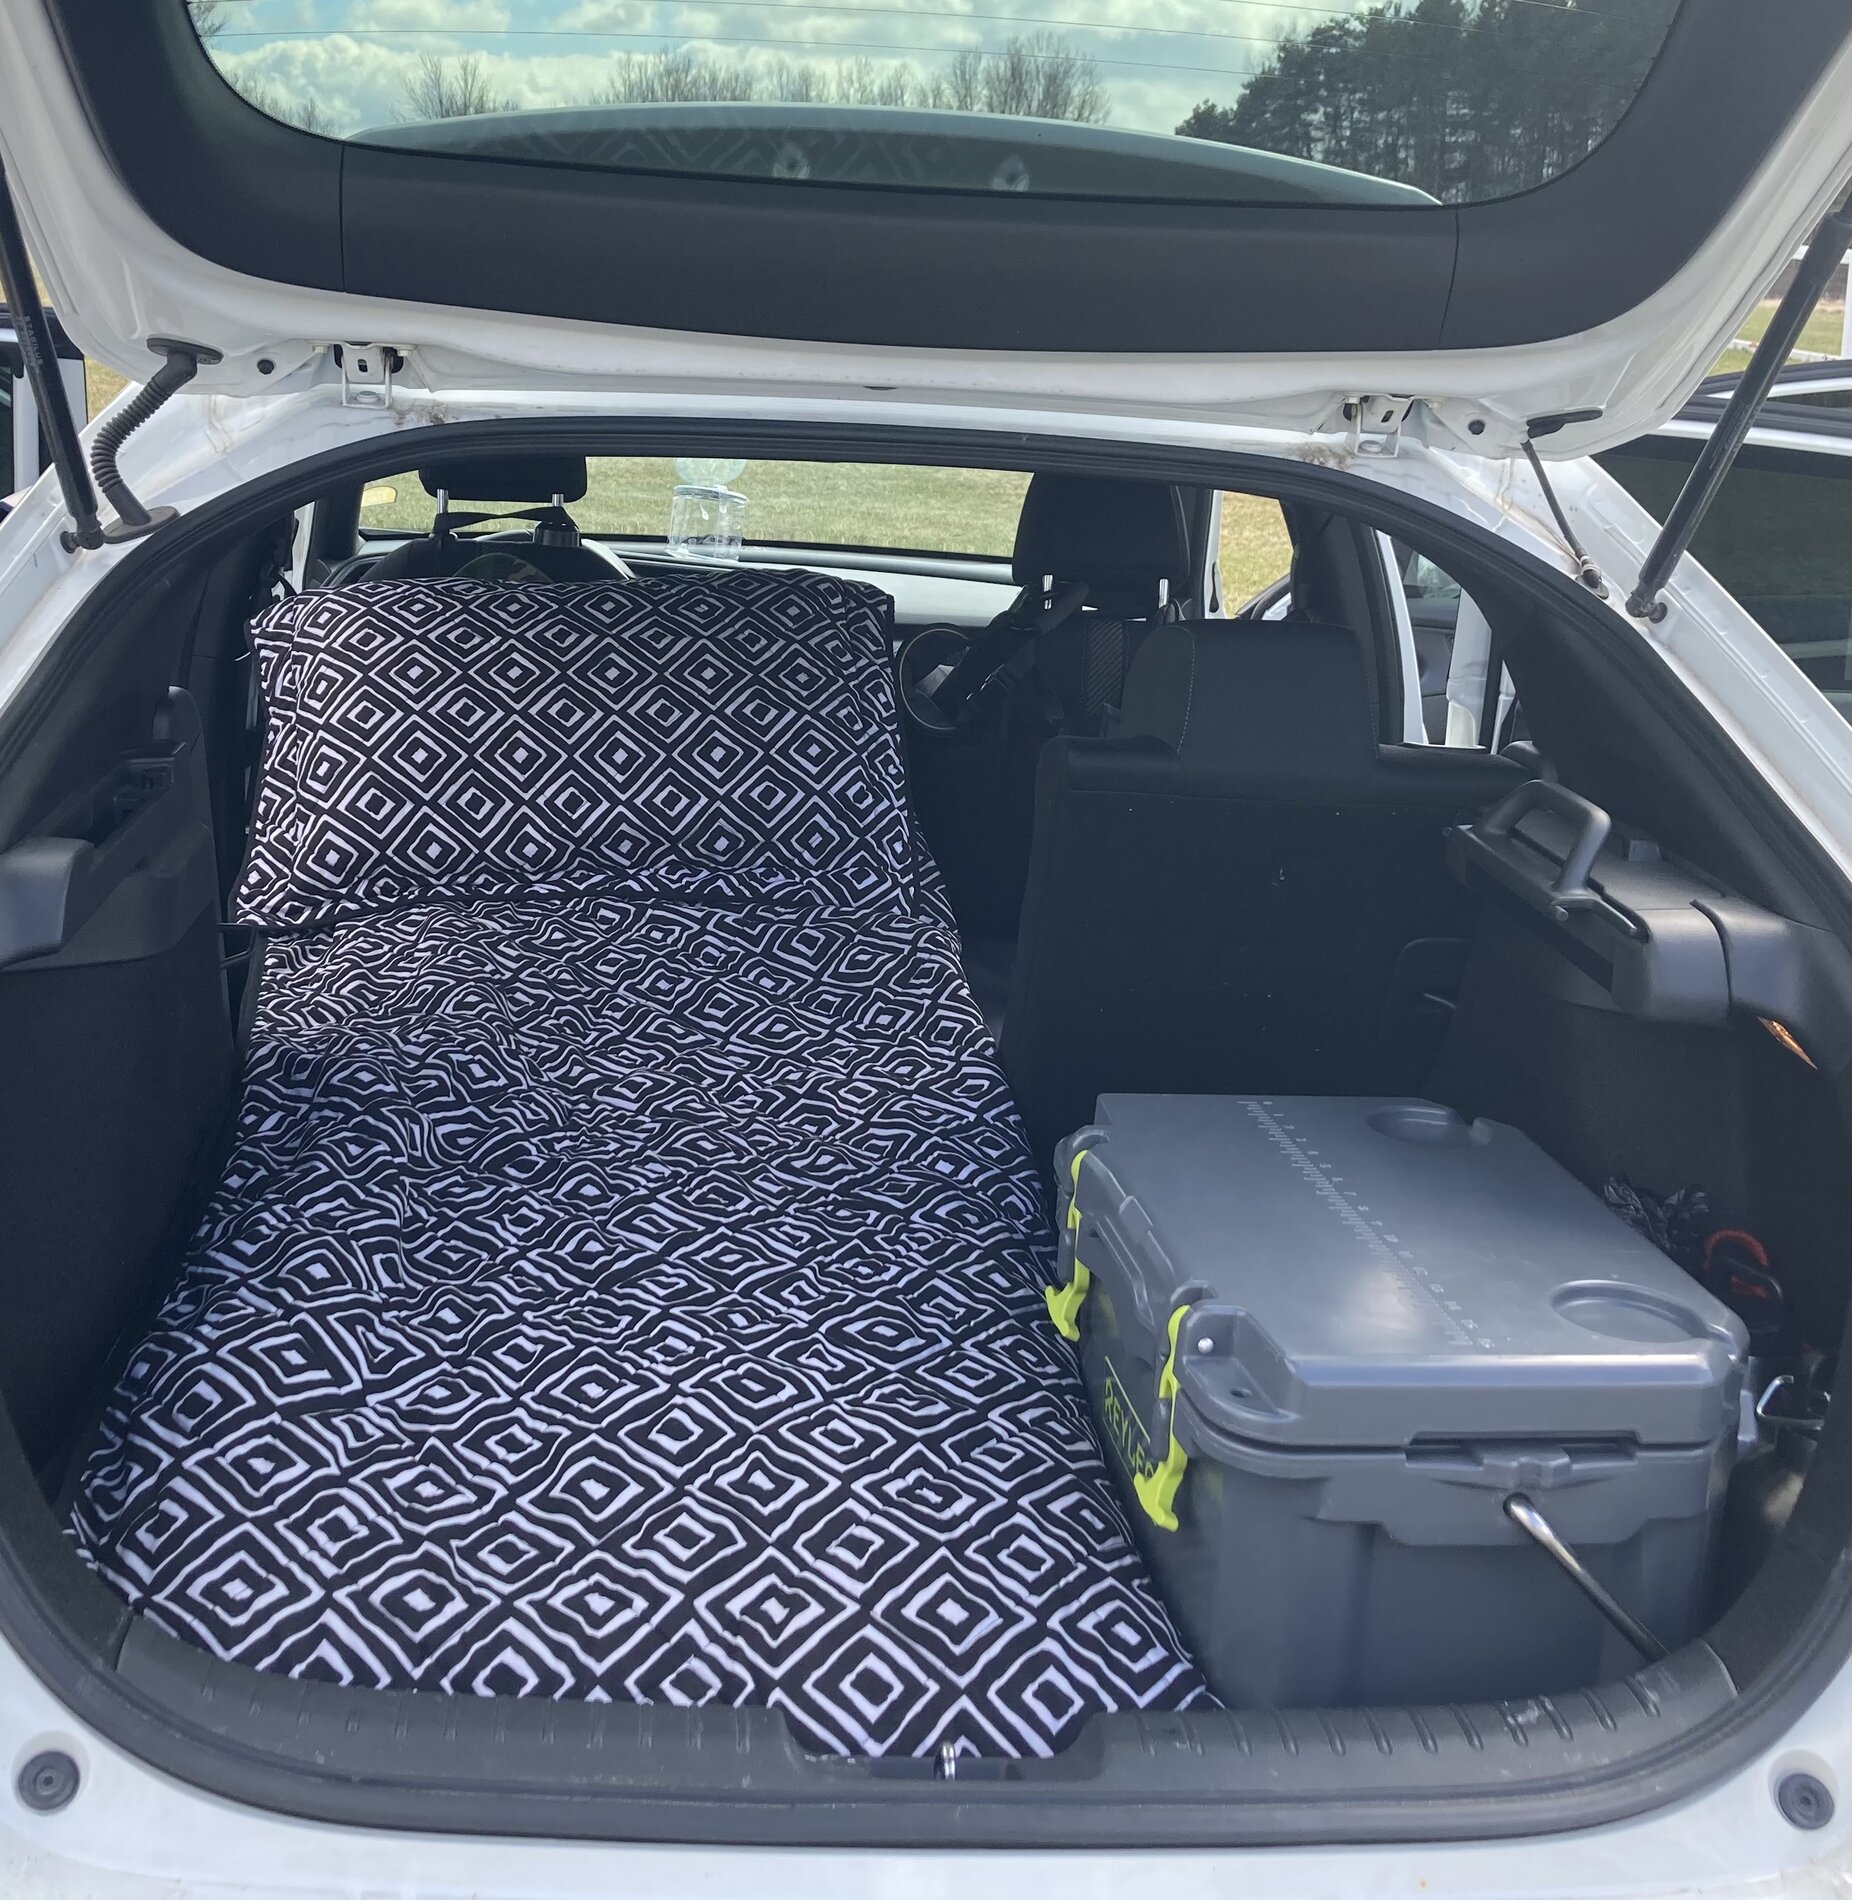 Honda Civic 10th gen Hatchback owners, have you slept/camped in the back yet? EEB4D8A7-ED18-47FB-A81F-2EAD0AF14595